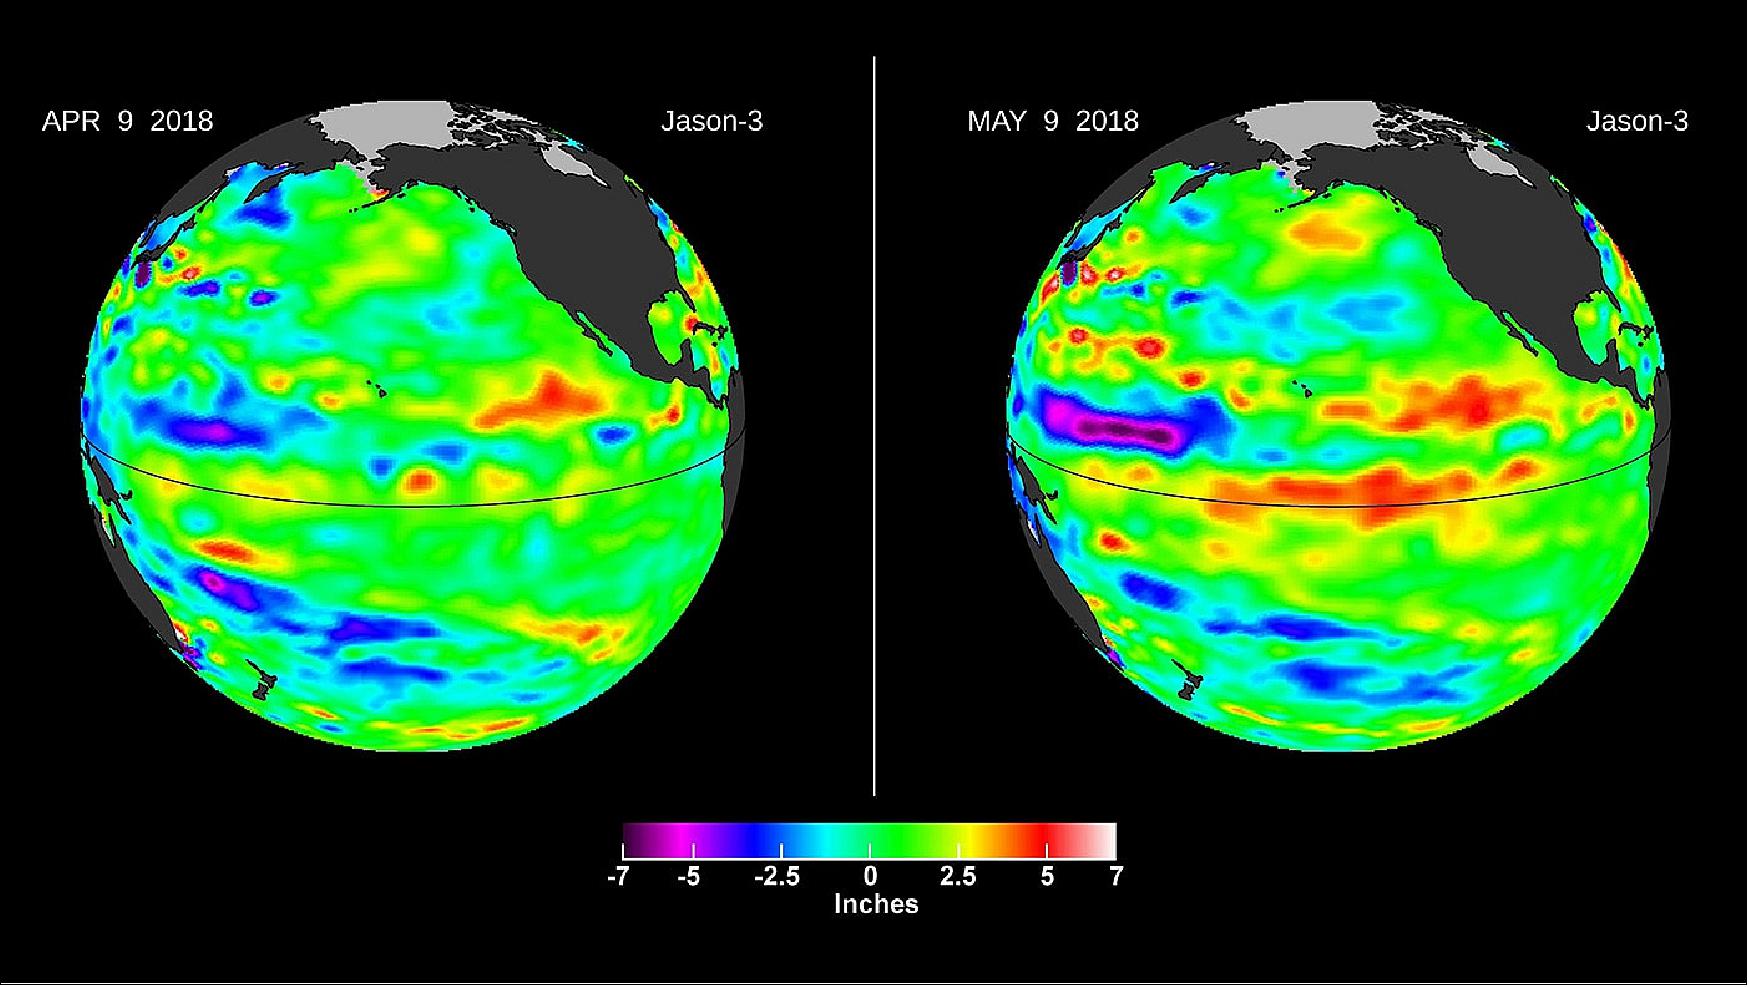 Figure 12: Images from the U.S./European Jason-3 satellite show sea surface height with respect to the seasonal cycle and the long-term trend. Blue/magenta colors indicate lower-than-normal sea levels, while yellow/red colors indicate higher-than-normal sea levels. The April 9, 2018 image (left panel) shows most of the ocean at neutral heights (green). A month later (right panel), a red patch is visible along the equator in the Central Pacific. The red area is a downwelling Kelvin wave, traveling eastward along the equator (image credit: NASA/JPL)